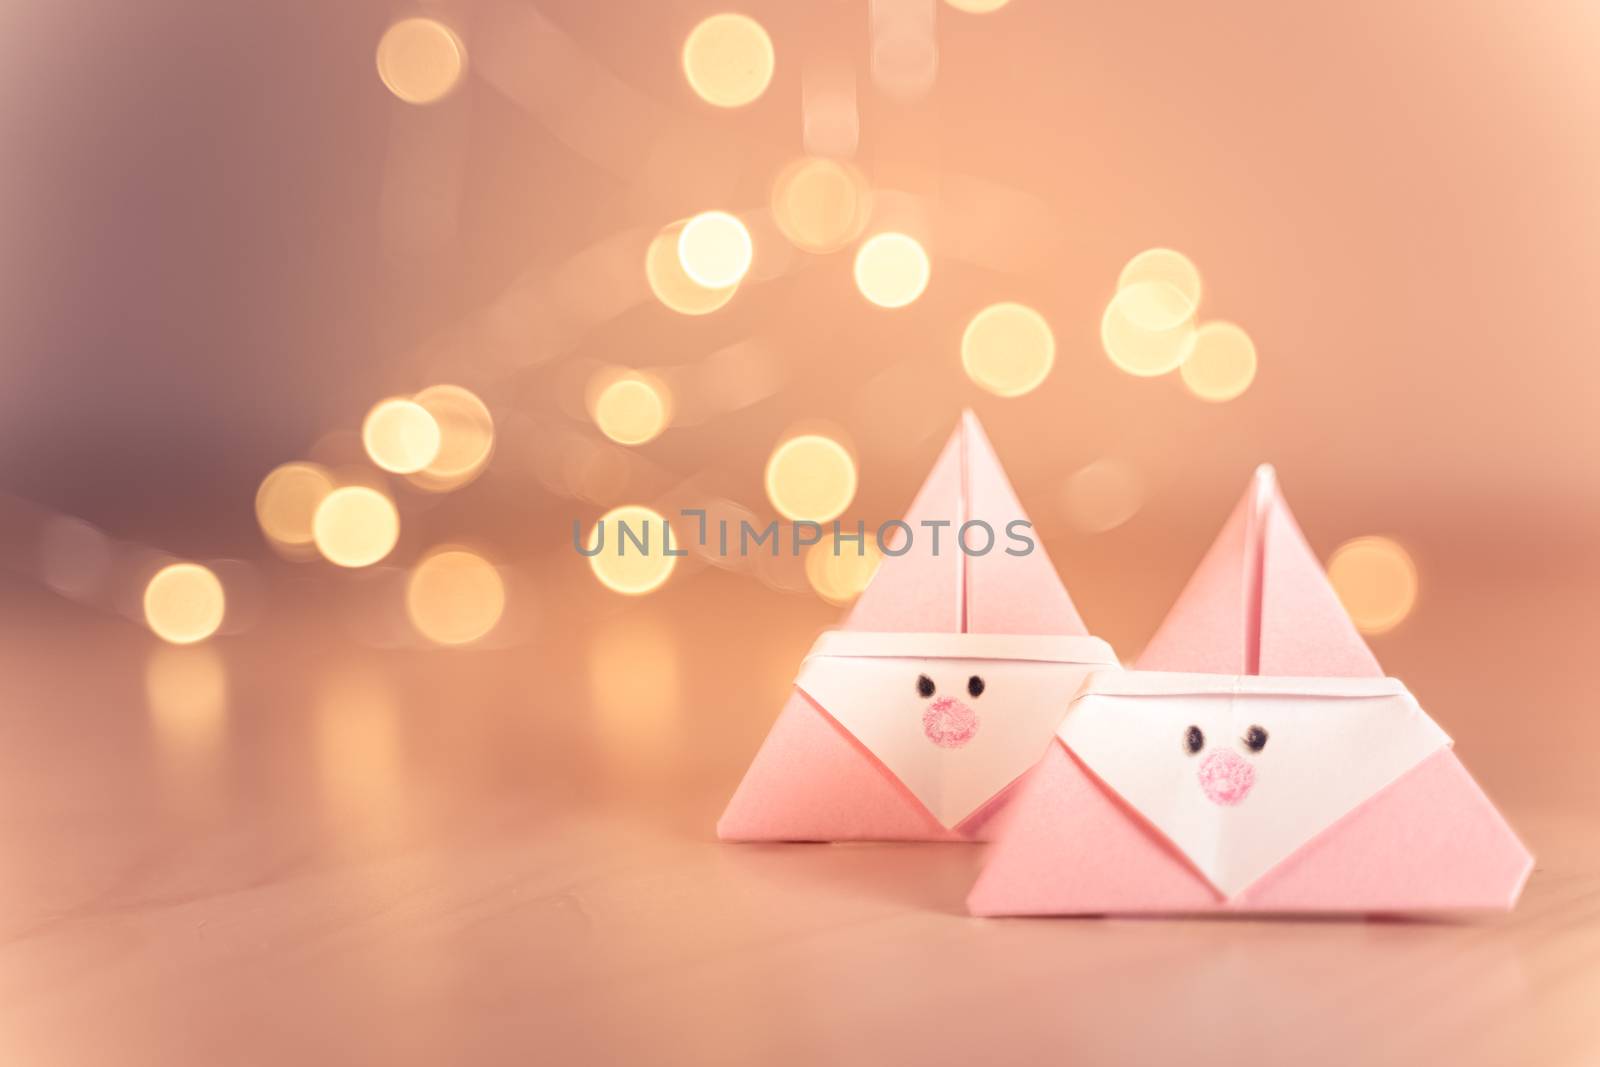 Origami Xmas scene with two pink Santa claus in paper craft and bokeh lights on the background. Sepia tone